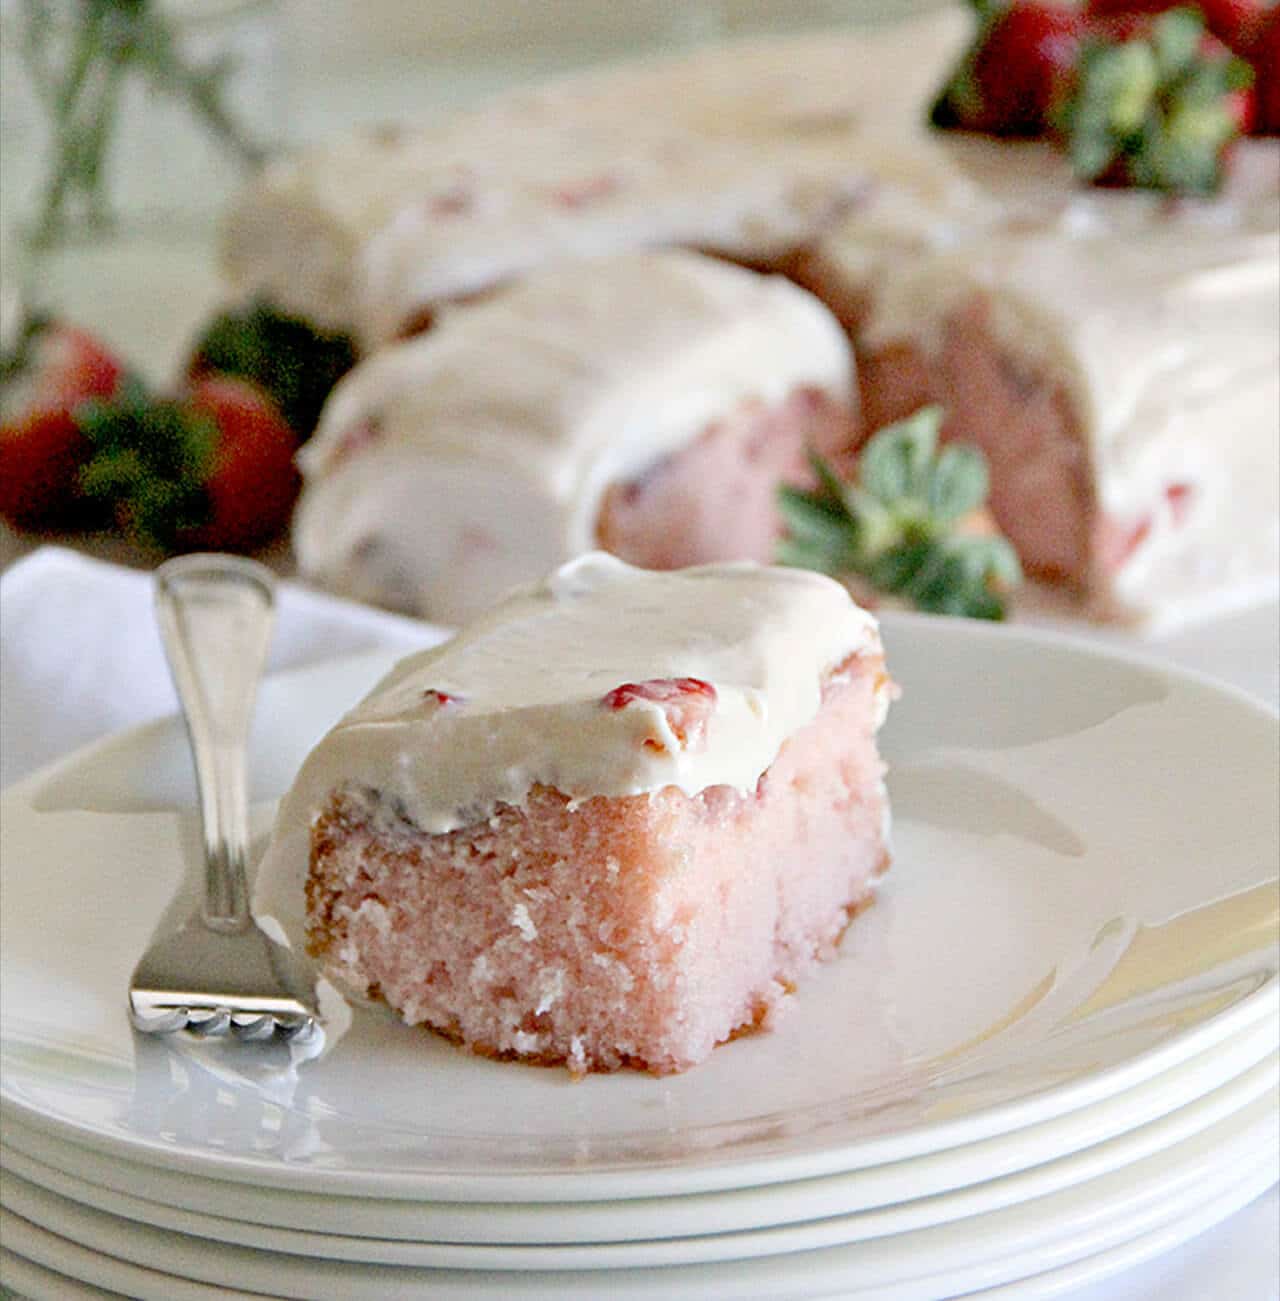 A luscious strawberry sheet cake with fresh strawberries and cream cheese frosting that's always a crowd-pleaser and easy to take along for potlucks.